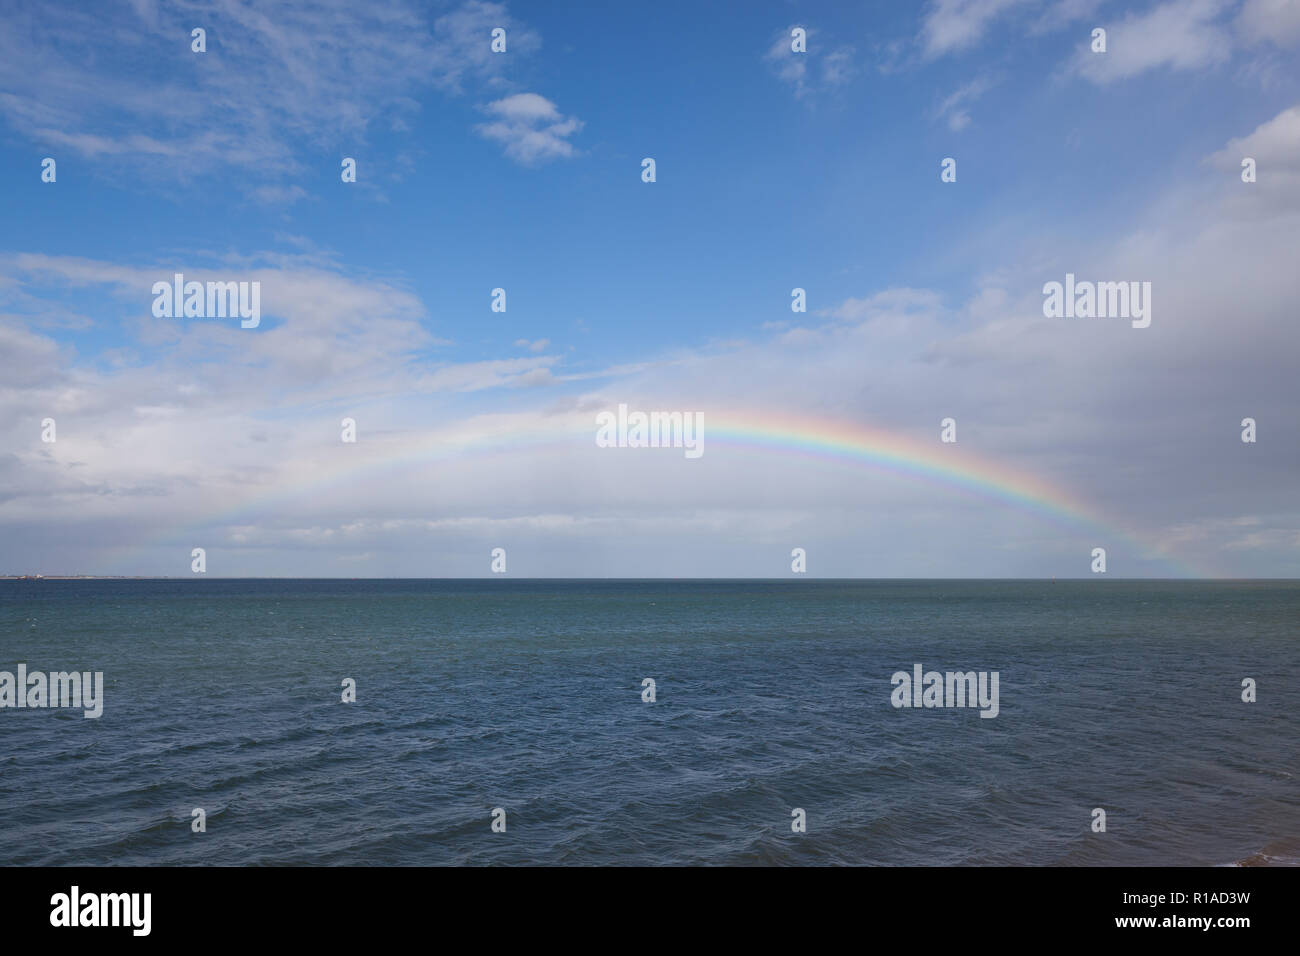 Rainbow seen out at sea Stock Photo - Alamy